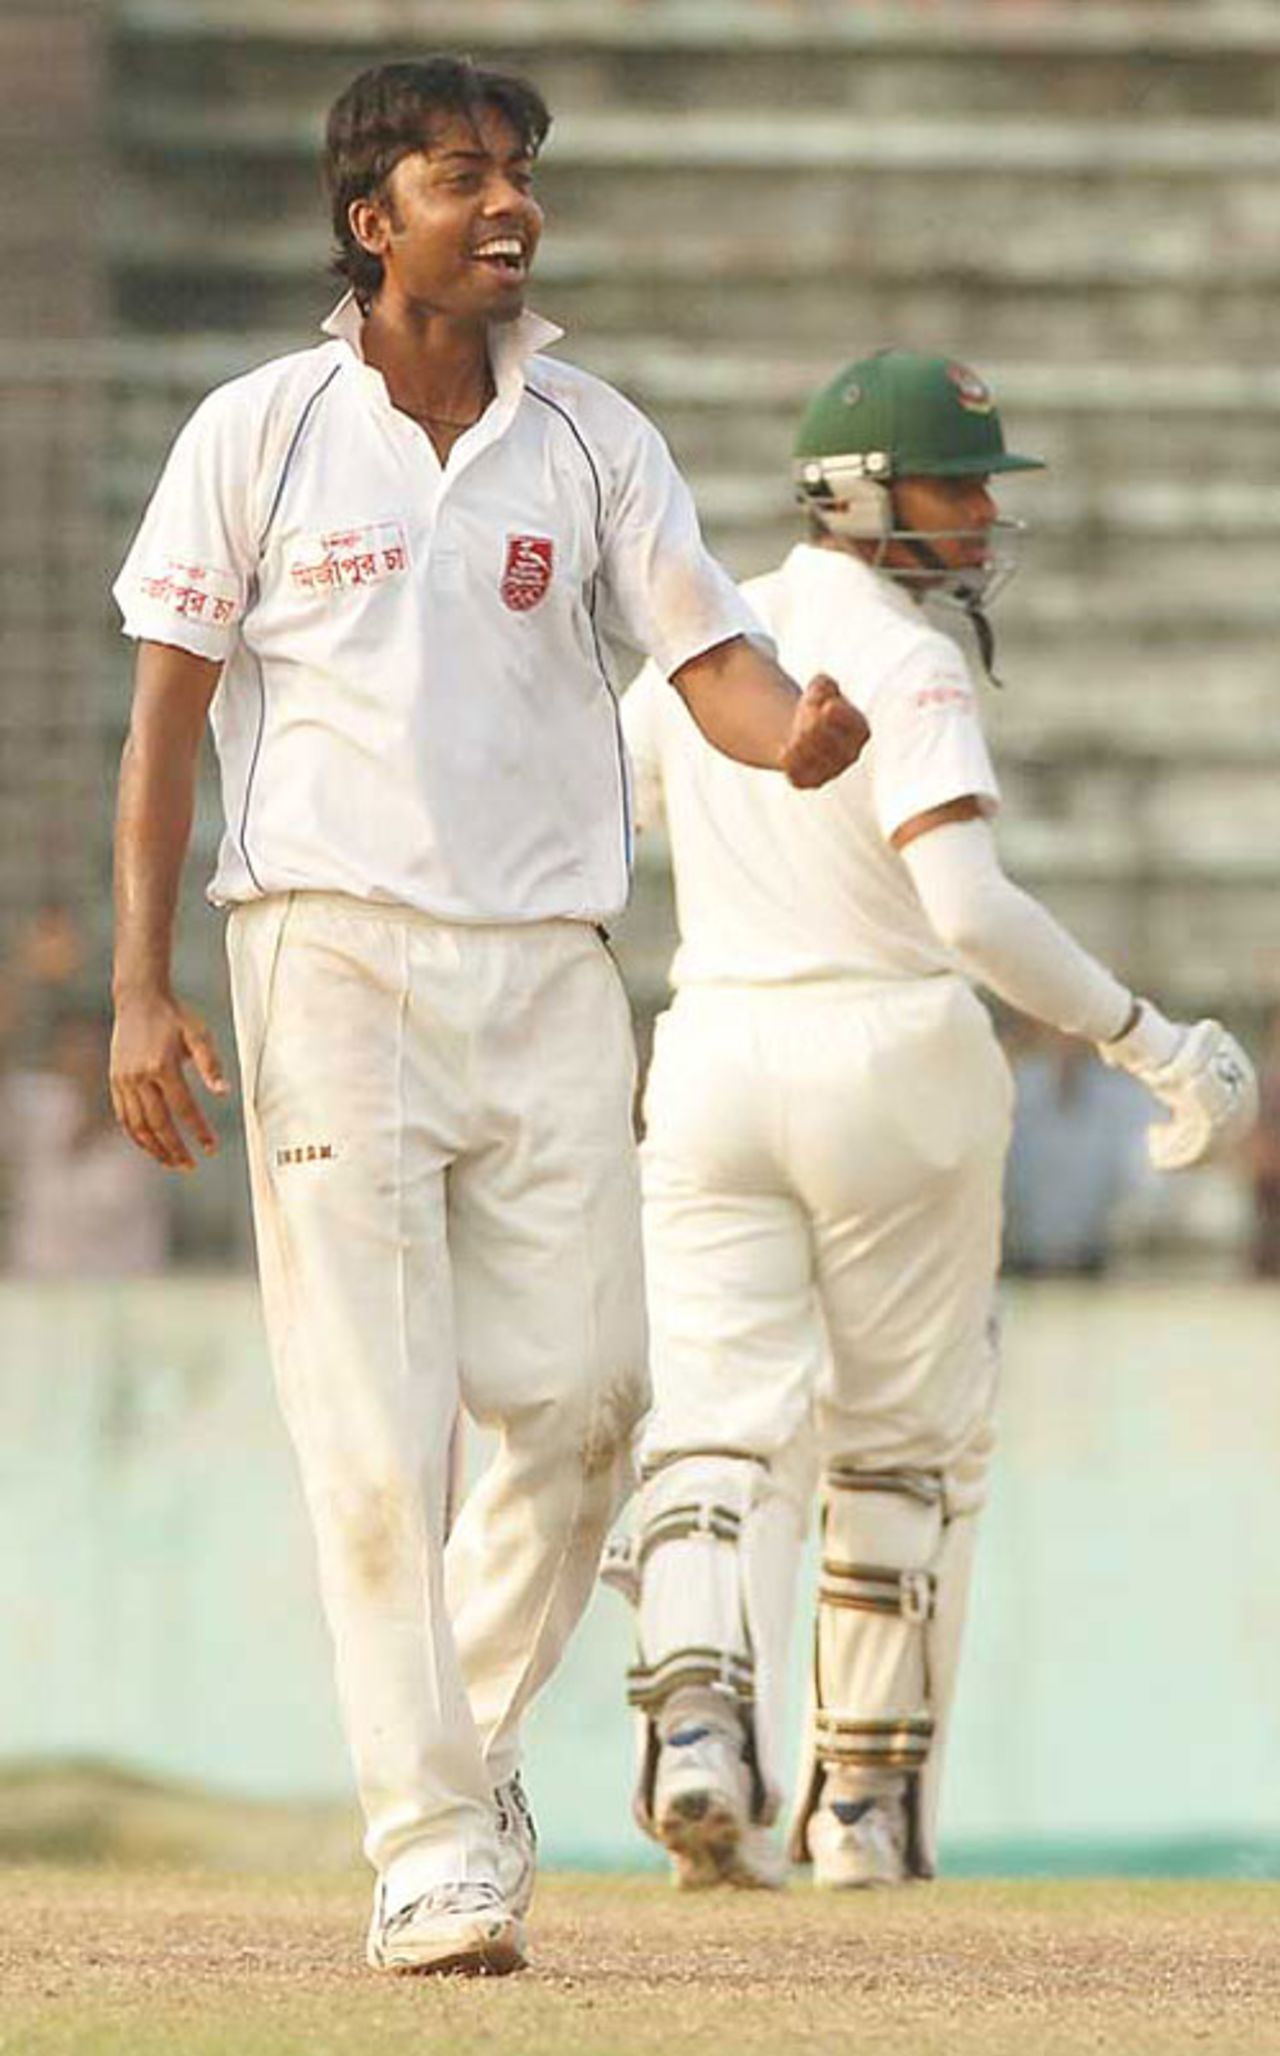 Syed Rasel celebrates one of his five wickets in the match, Dhaka Division v Khulna Division, October 22, 2007